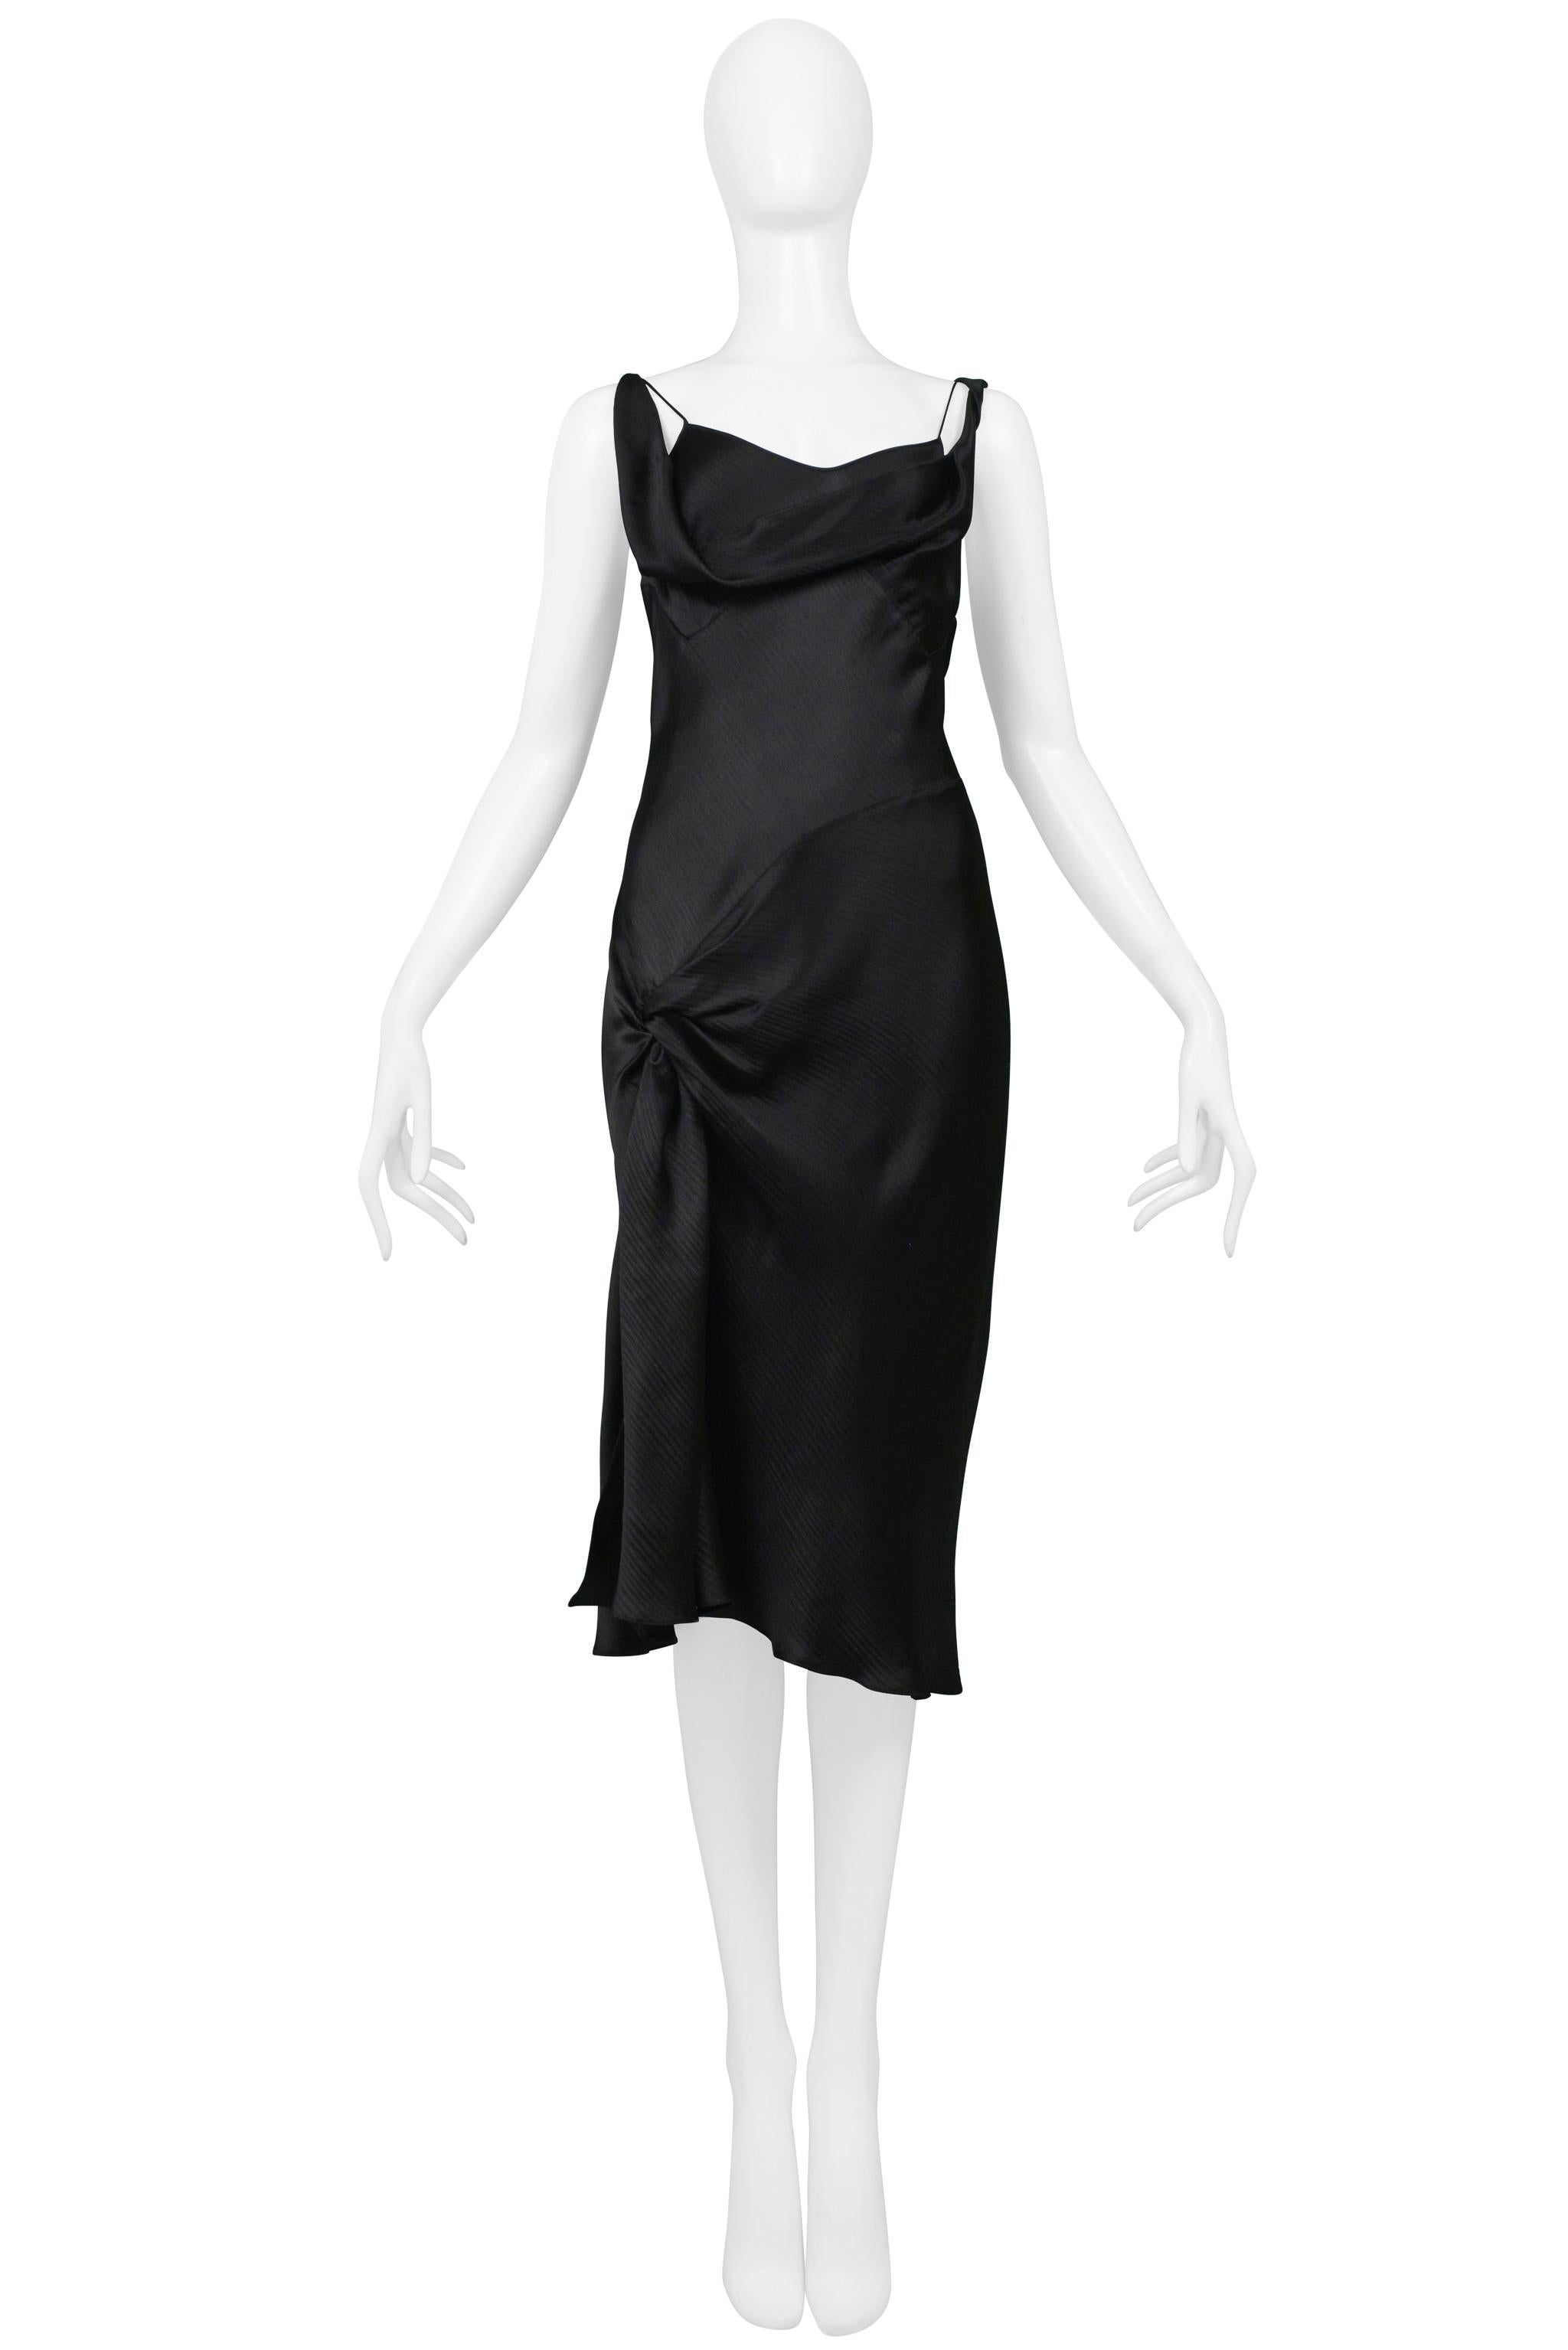 Stunning John Galliano Black Satin Slip Dress with Hip Knot and Slit 1990s In Excellent Condition For Sale In Los Angeles, CA